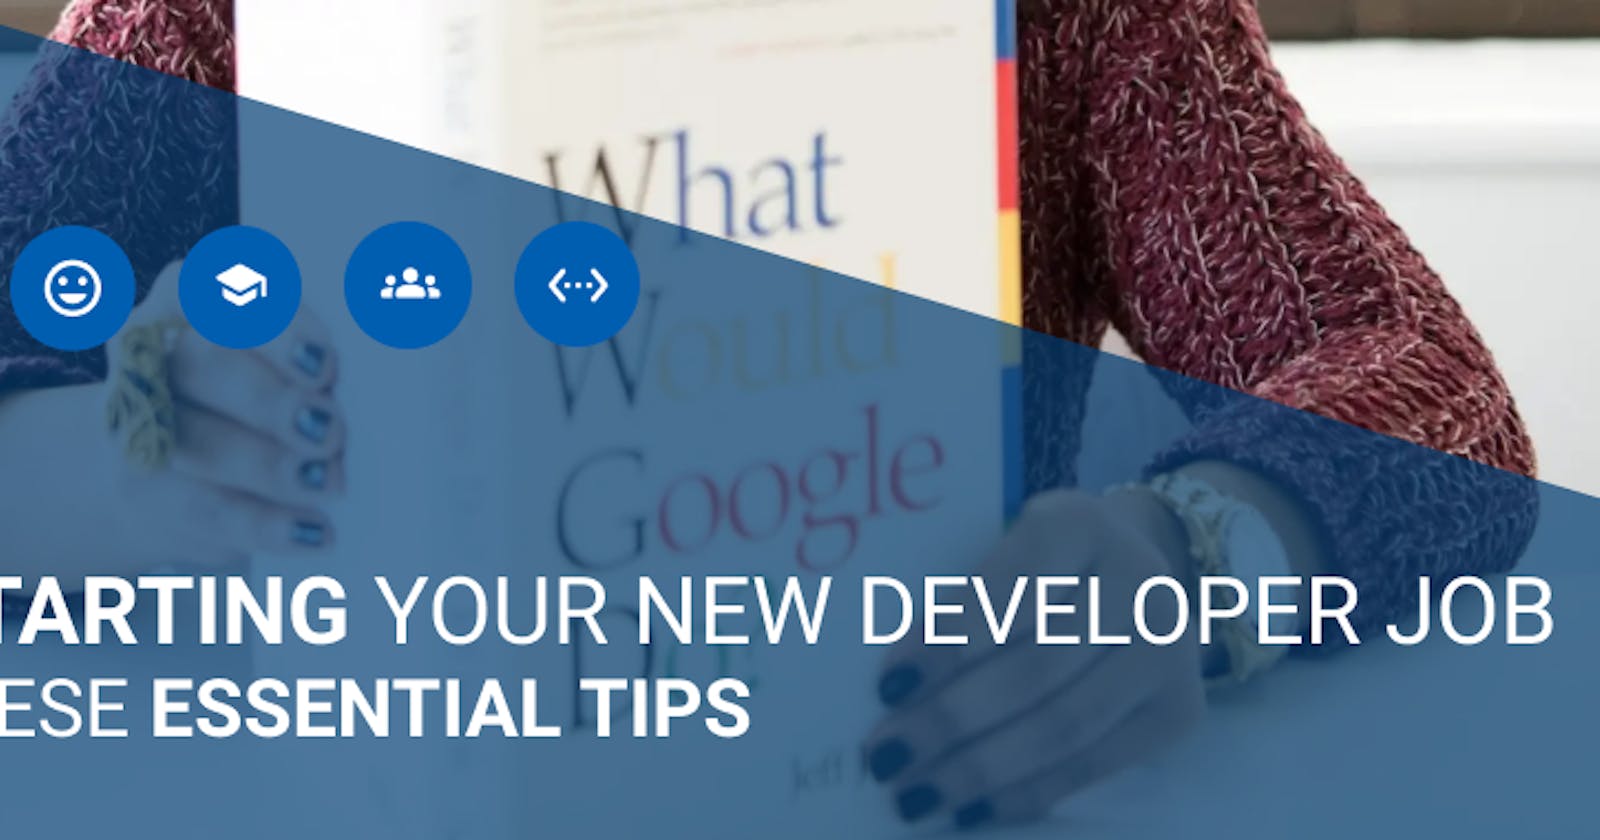 Kick-starting Your New Developer Job with these Essential Tips